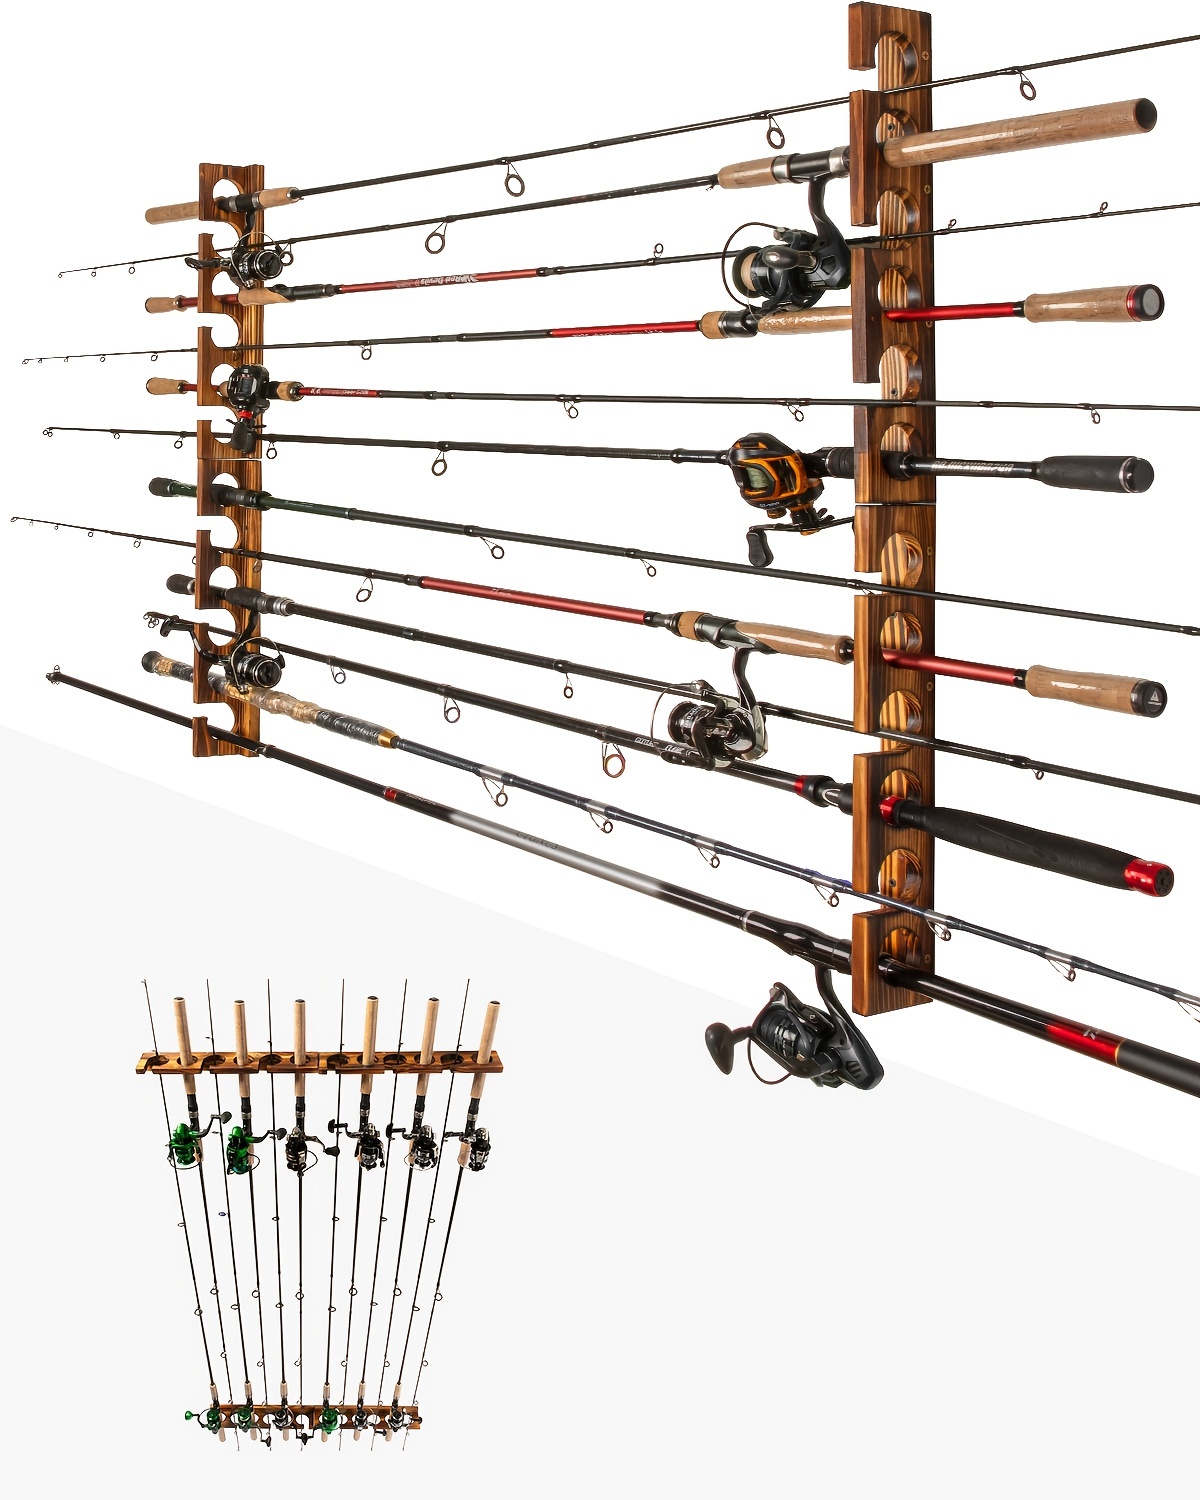 Fishing Rod Holder / Fishing Rod Rack / Fishing Pole Holder Wall /Ceiling  Mount, Hold up to 8 Fishing Rods, Fishing Poles Storage & Display (Curved 